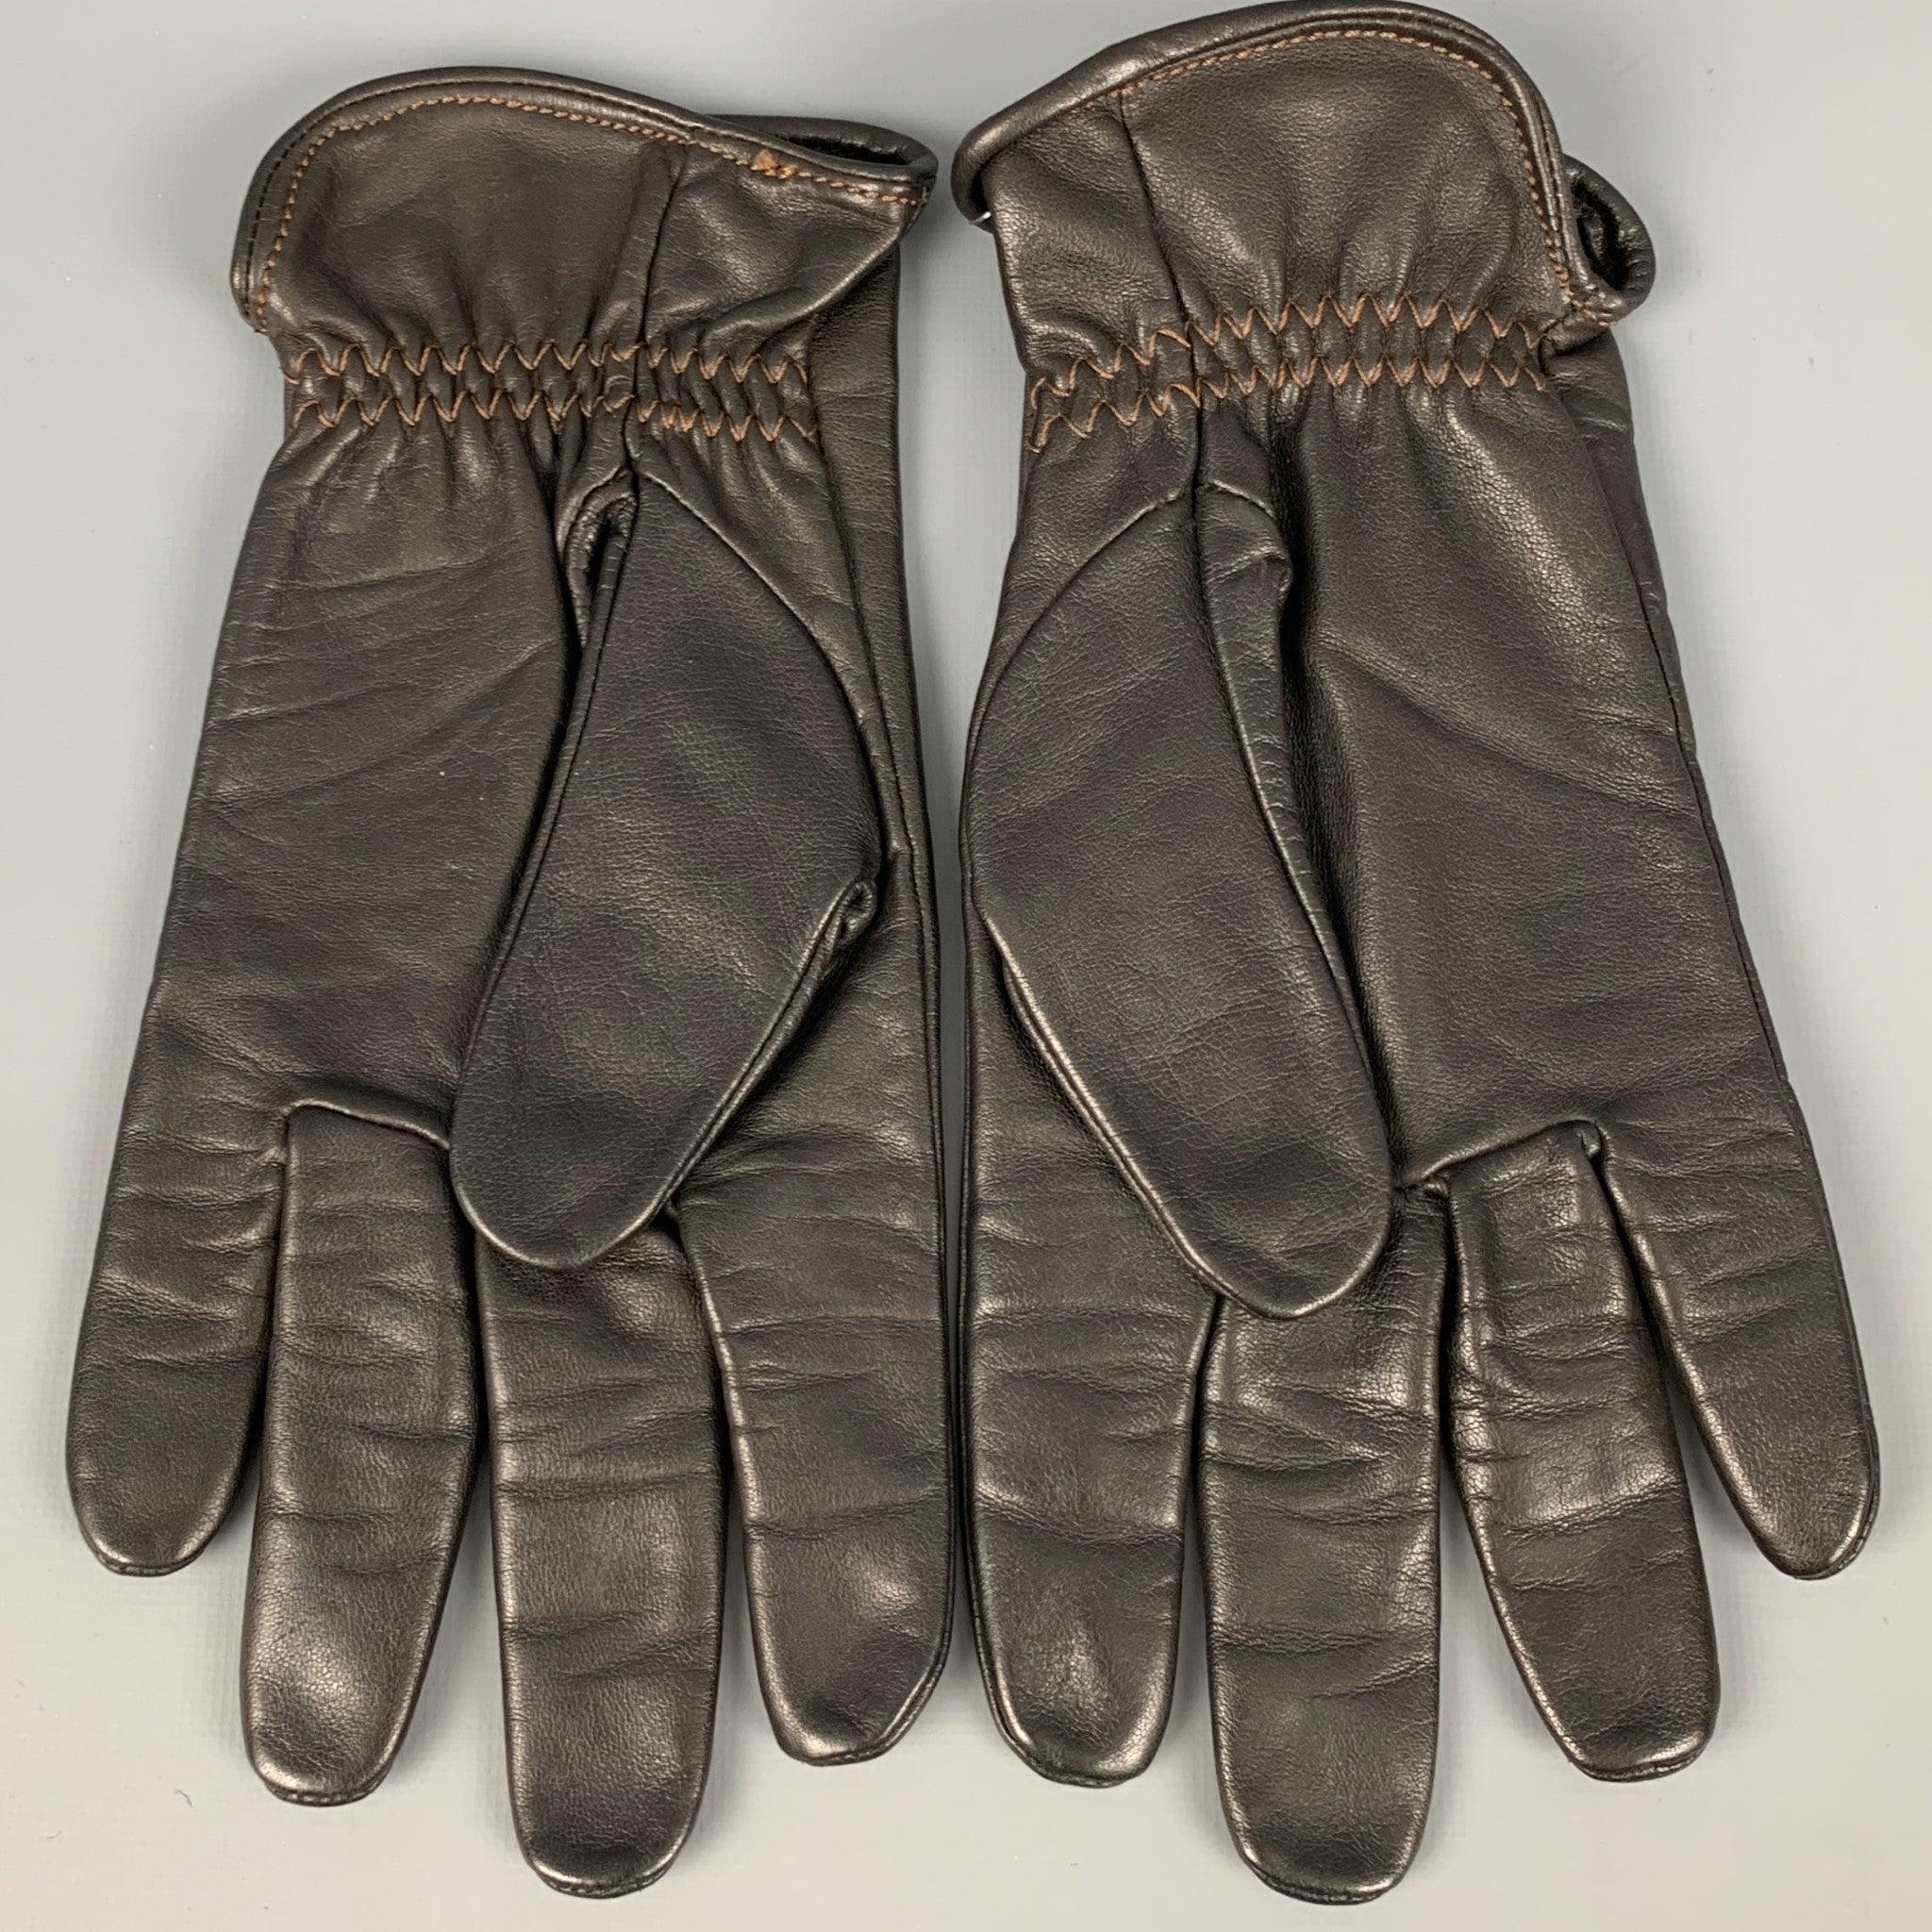 JIL SANDER
gloves in a brown leather. Made in Italy.Very Good Pre-Owned Condition.
Minor signs of wear. 

Marked:   L 

Measurements: 
  Width: 4.5 inches Length: 10.25 inches 
  
  
 
Reference: 125210
Category: Gloves
More Details
    
Brand:  JIL